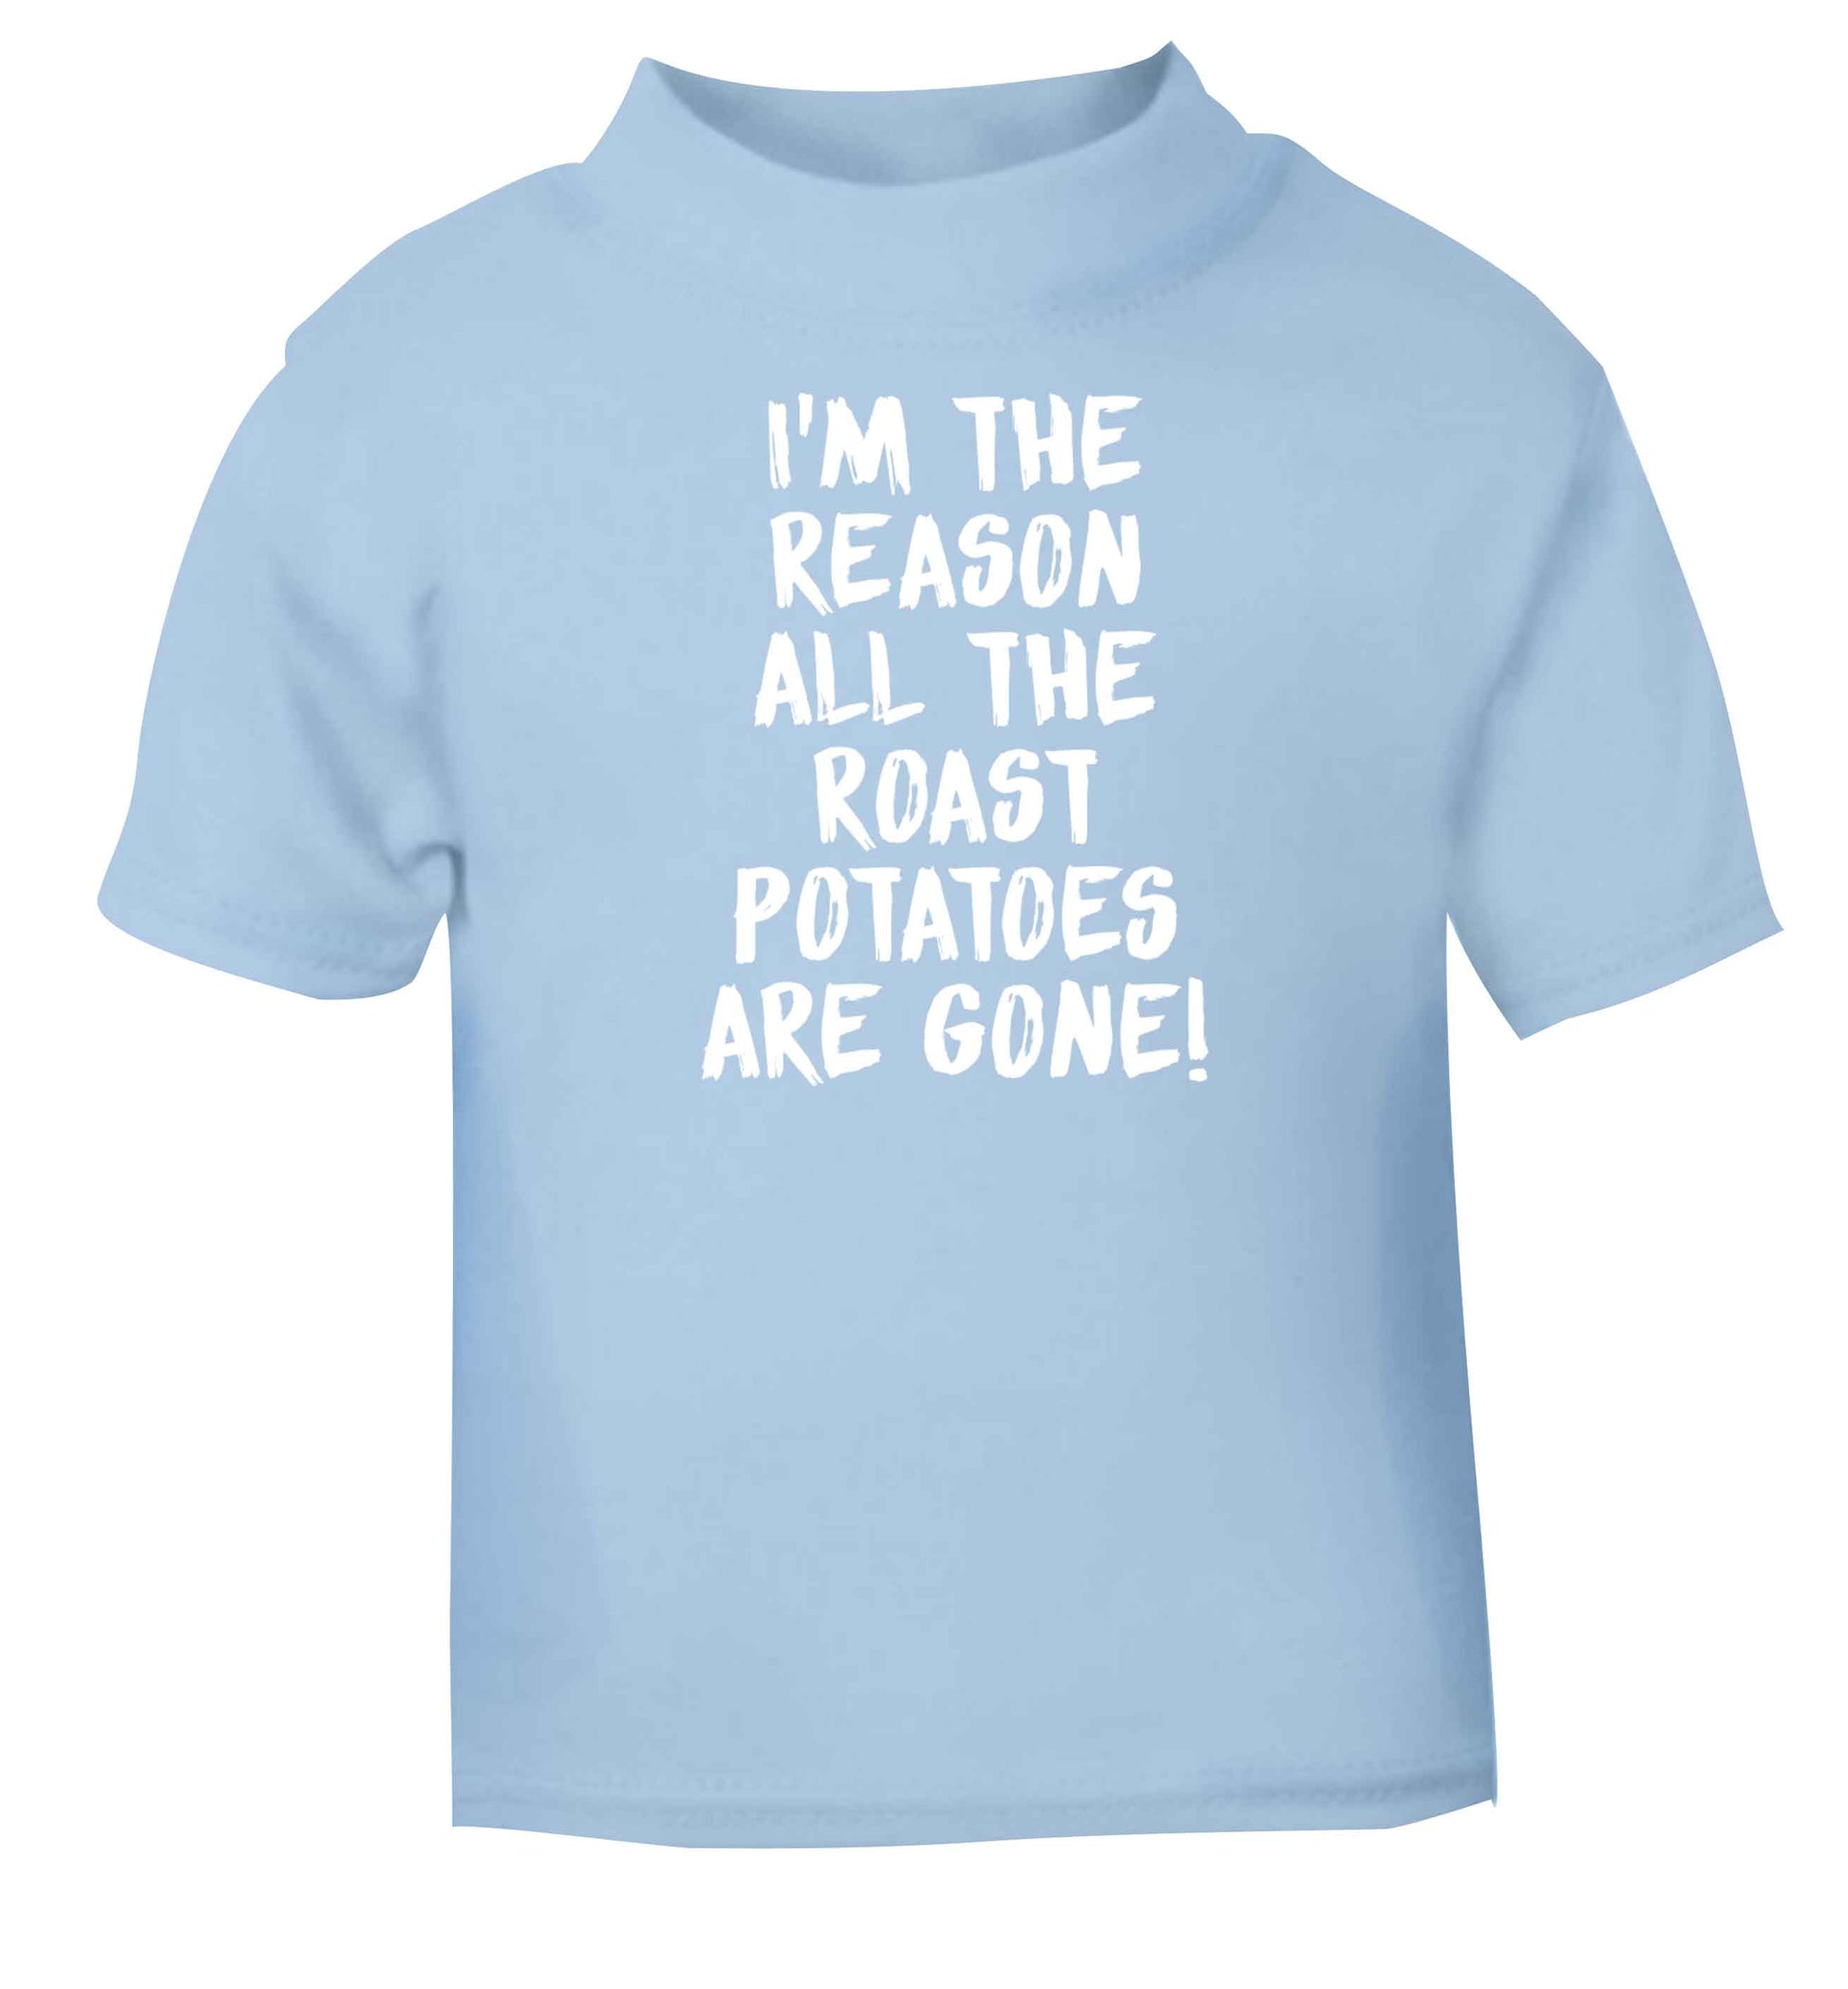 I'm the reason all the roast potatoes are gone light blue baby toddler Tshirt 2 Years